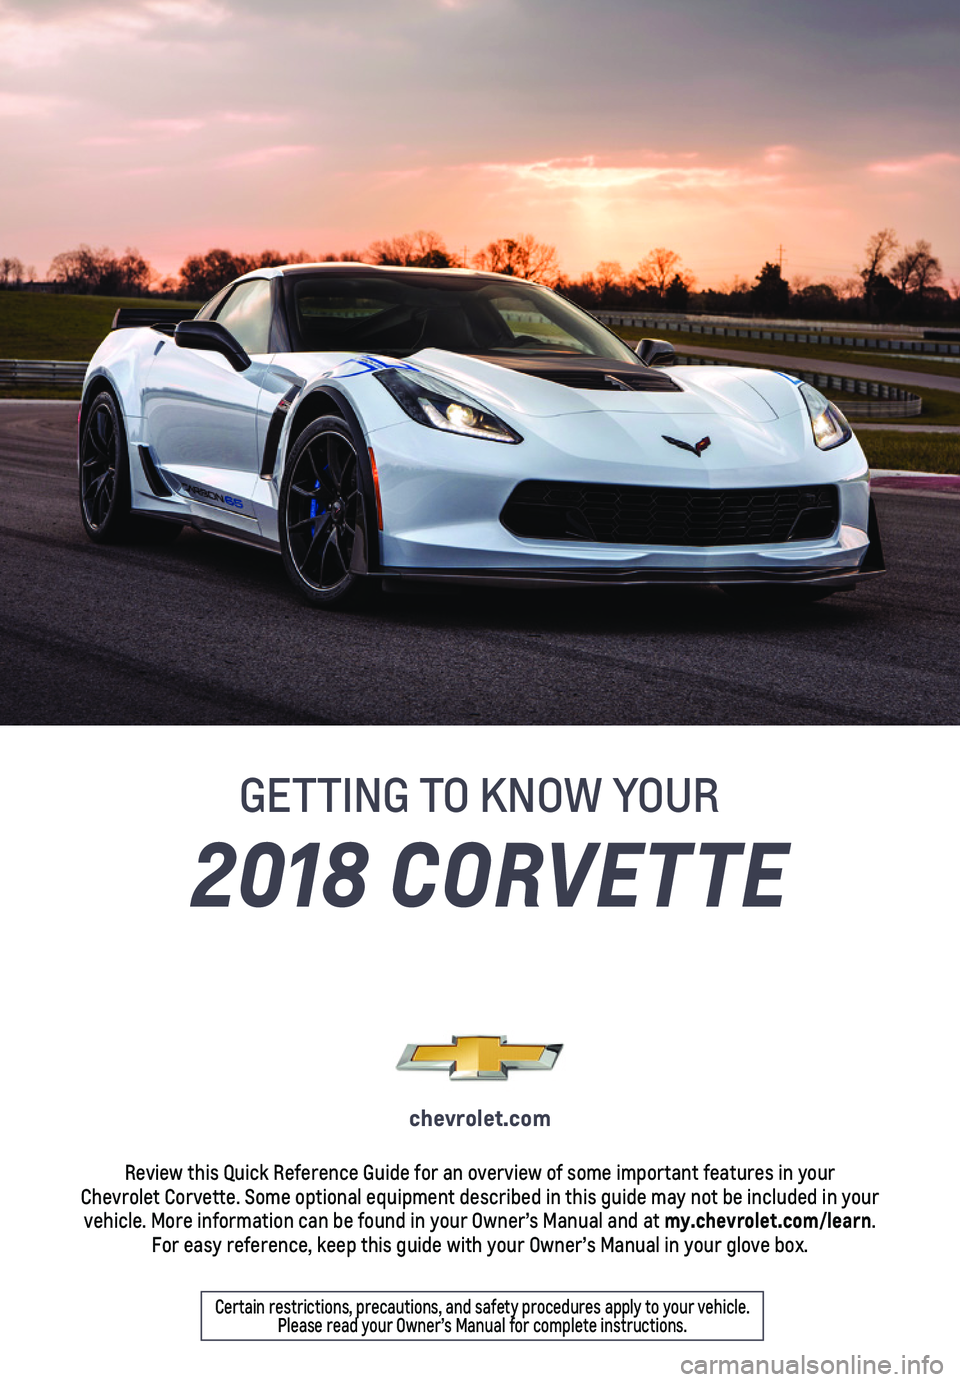 CHEVROLET CORVETTE 2018  Get To Know Guide 2018 CORVETTE
GETTING TO KNOW YOUR
chevrolet.com
Review this Quick Reference Guide for an overview of some important feat\
ures in your  Chevrolet Corvette. Some optional equipment described in this g